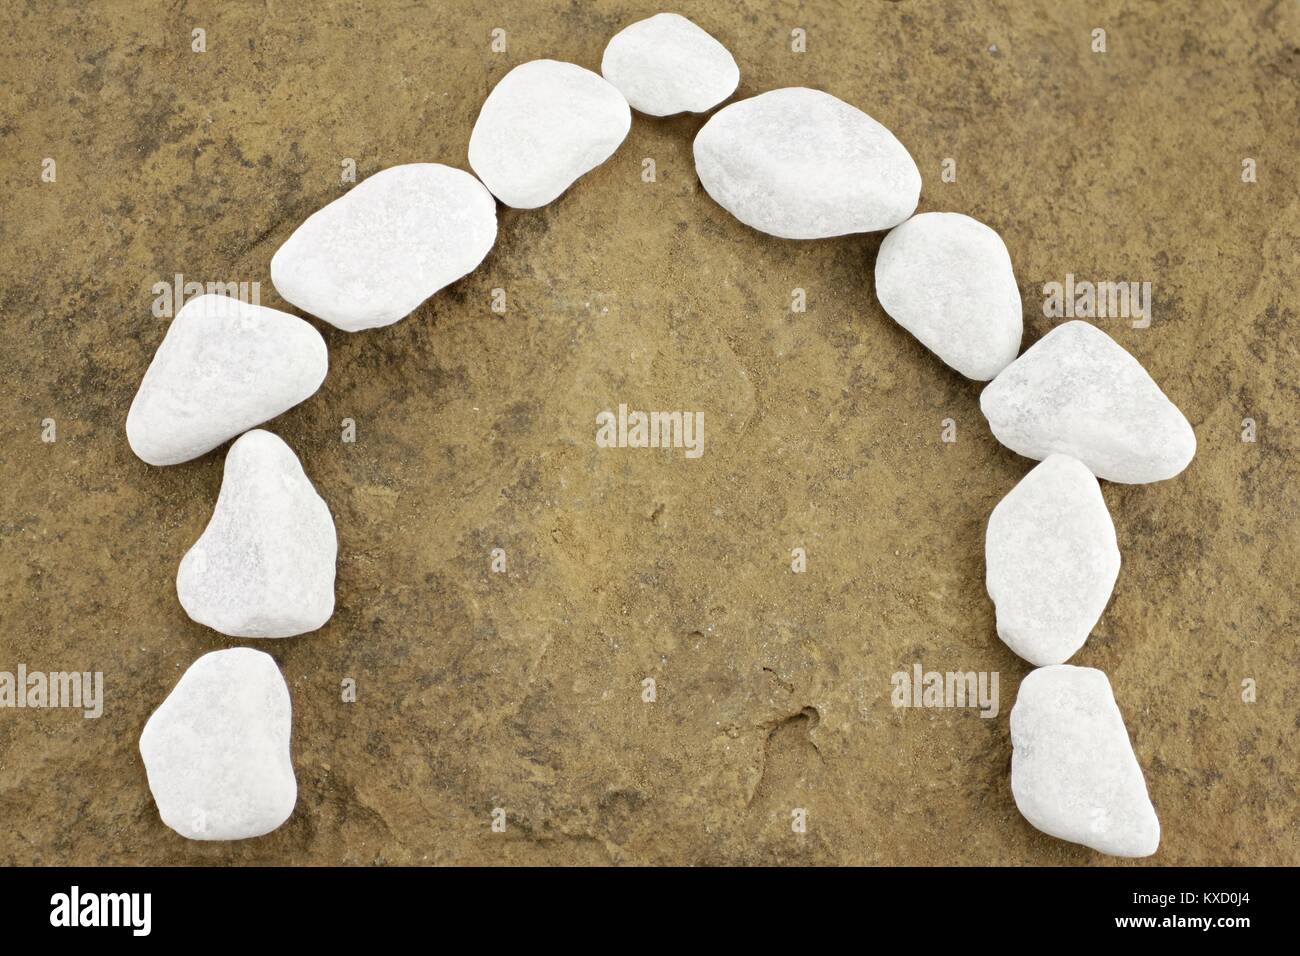 Symbolic house presented with white pebbles Stock Photo